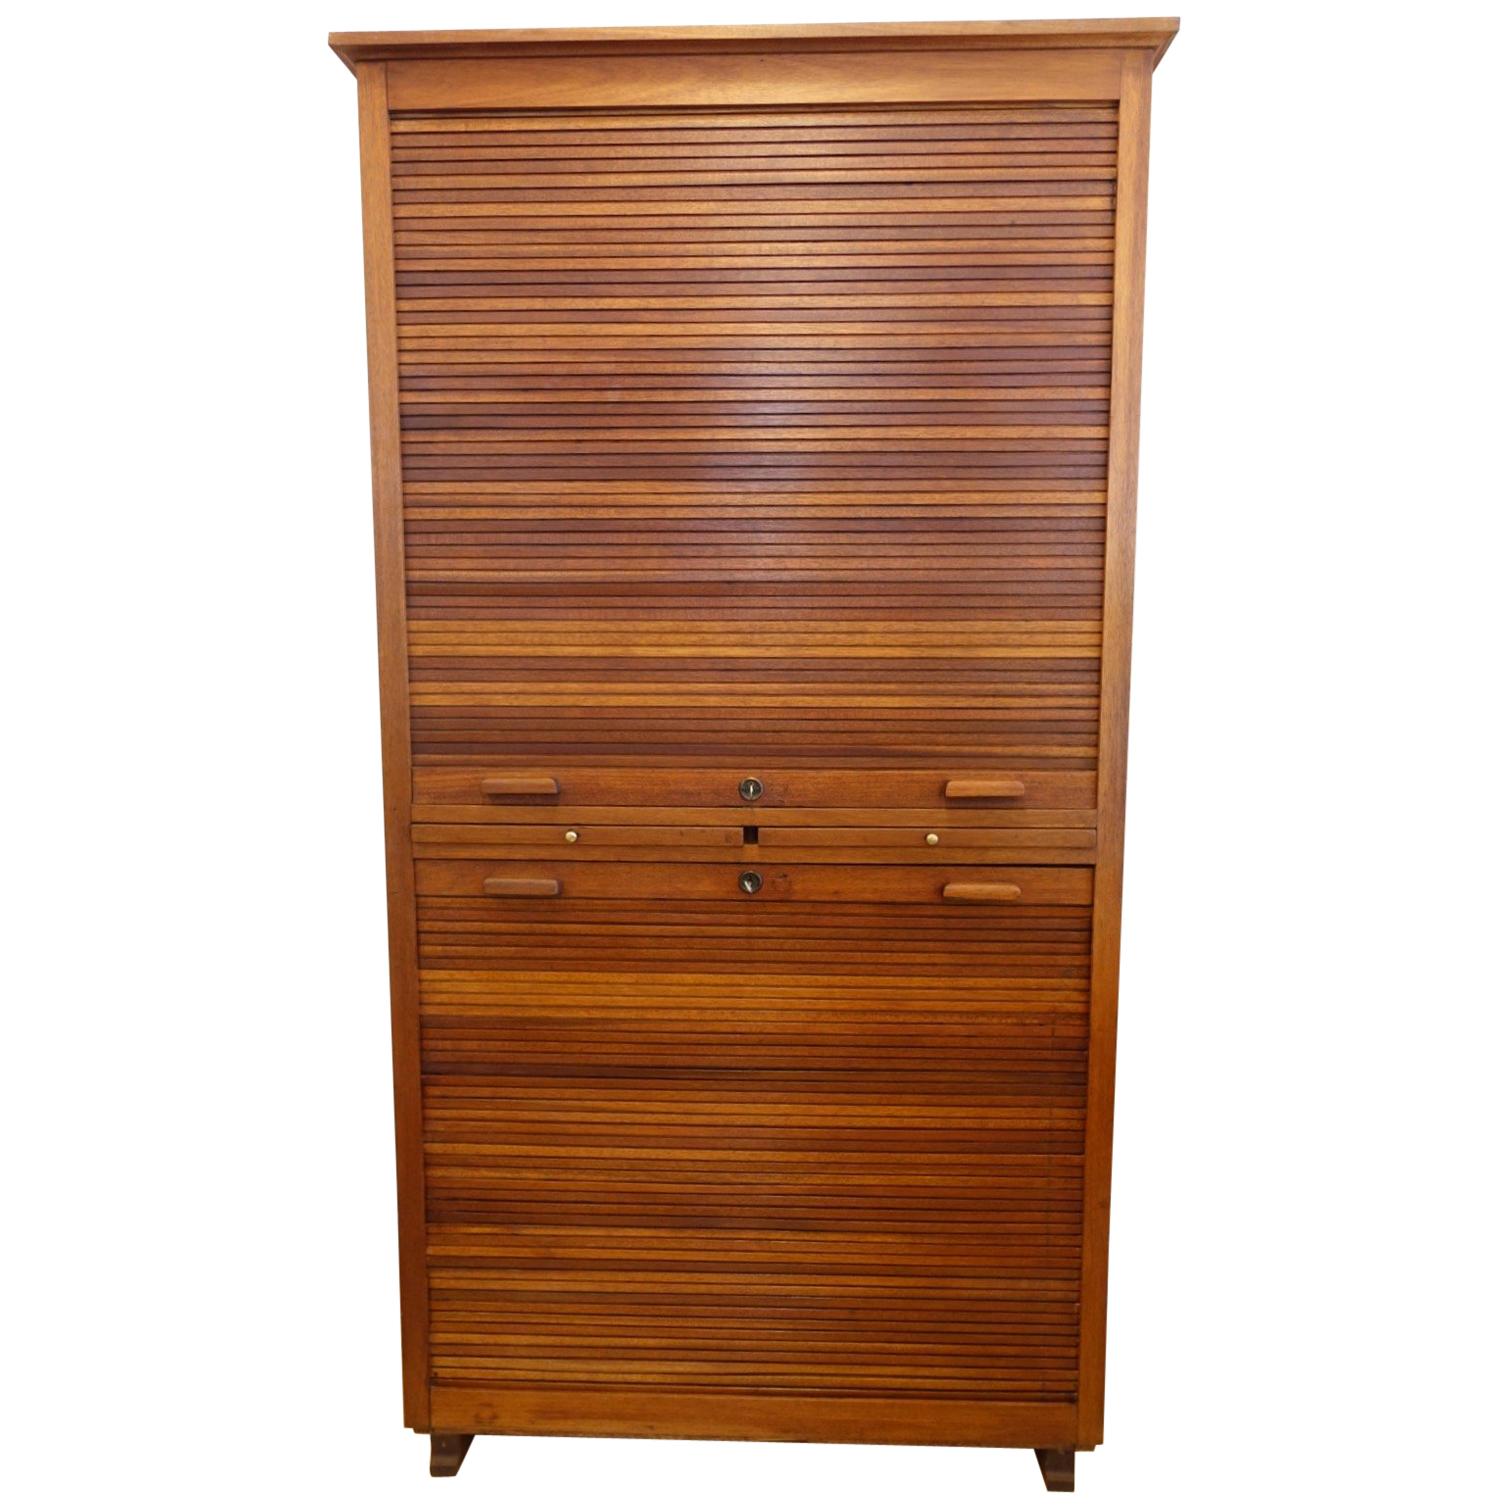 Industrial Portuguese Walnut Roller Blind Door Filing Cabinet by Olaio, 1940s